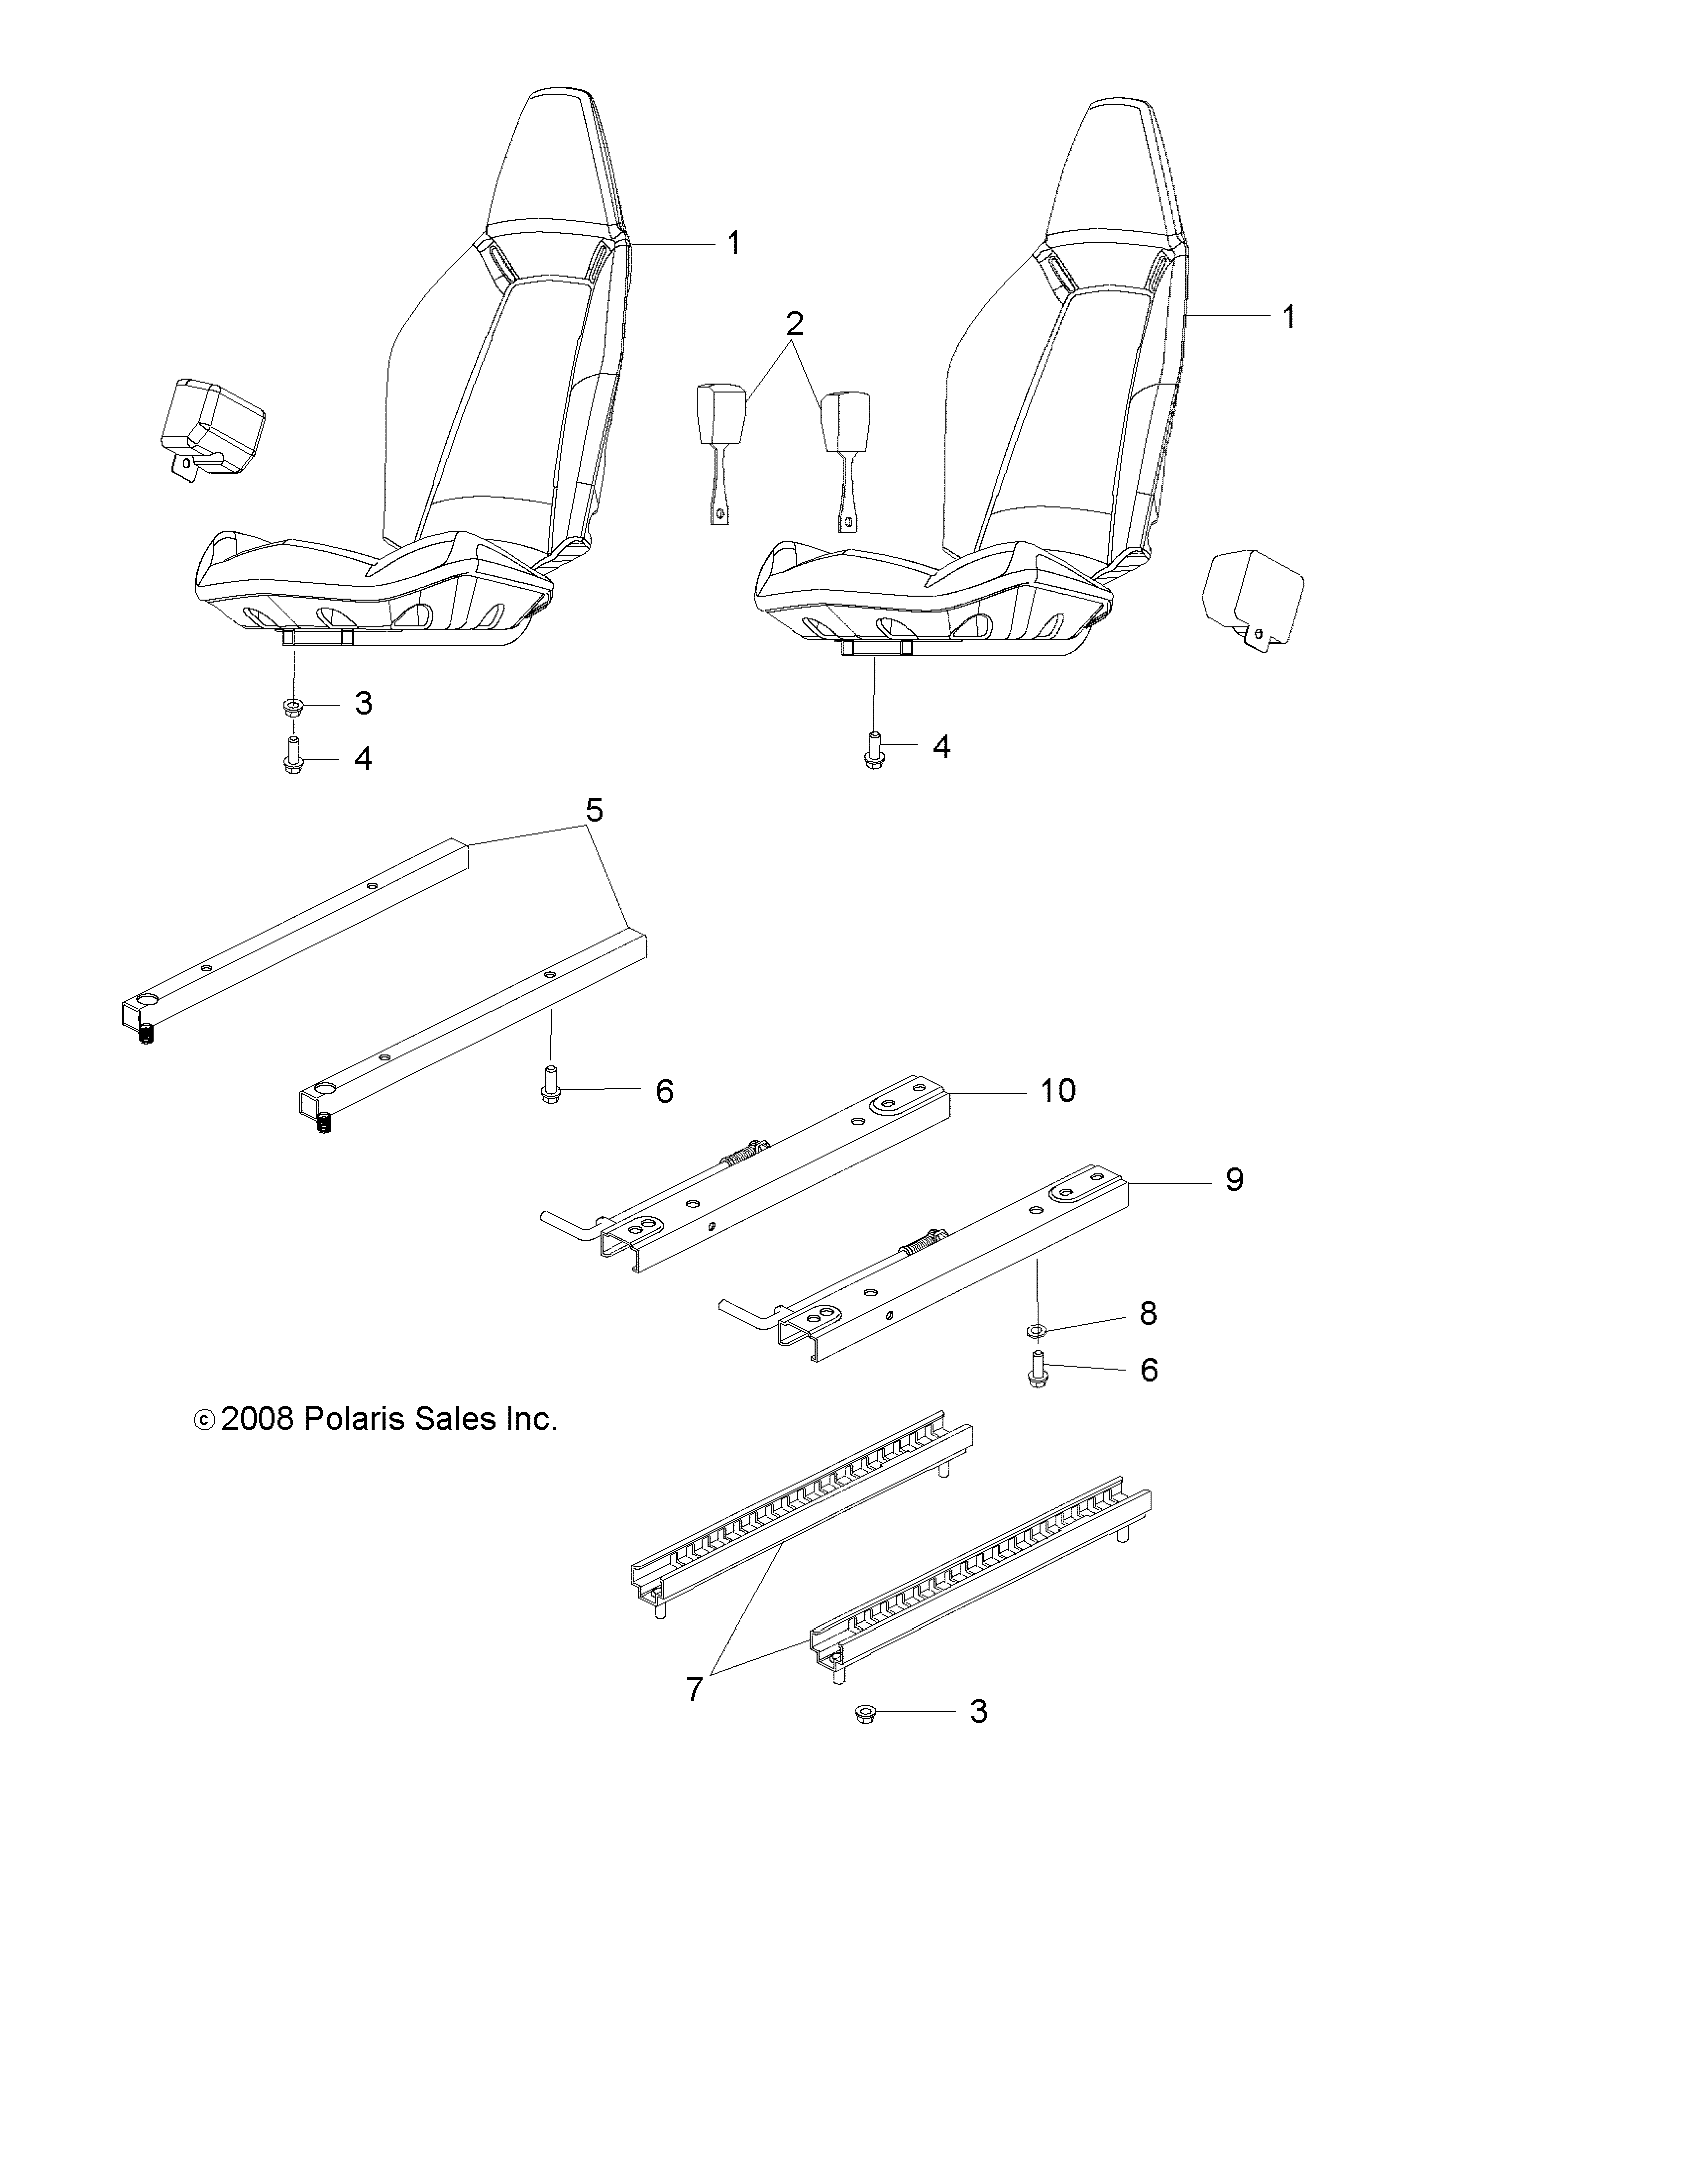 Part Number : 0454389 GUIDE-SEAT.LOWER